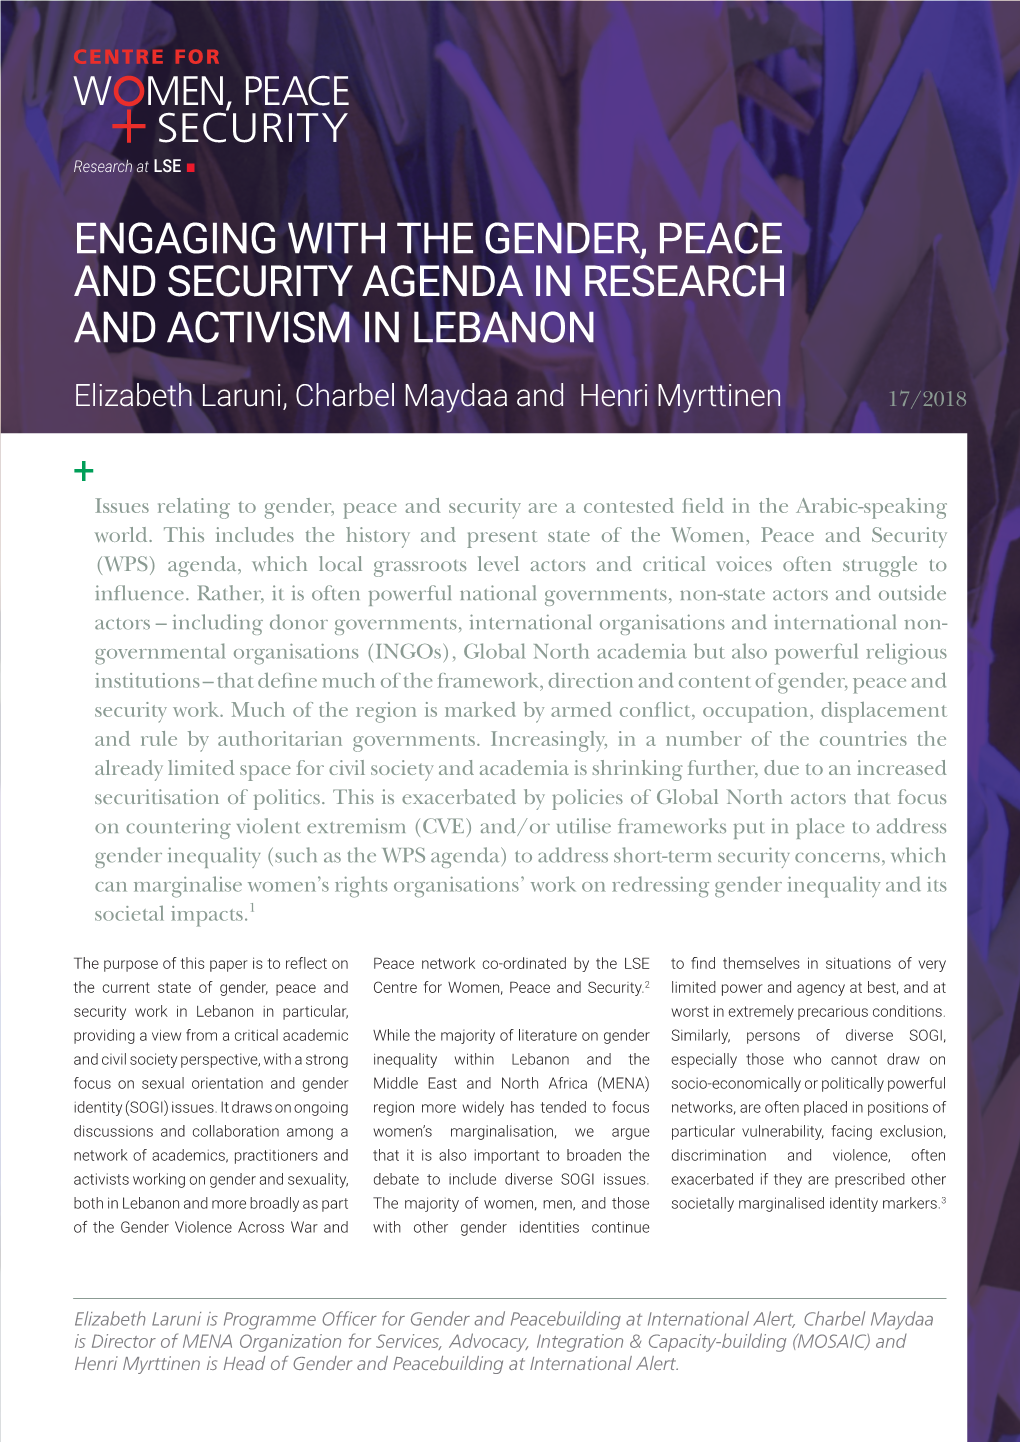 Engaging with the Gender, Peace and Security Agenda in Research and Activism in Lebanon